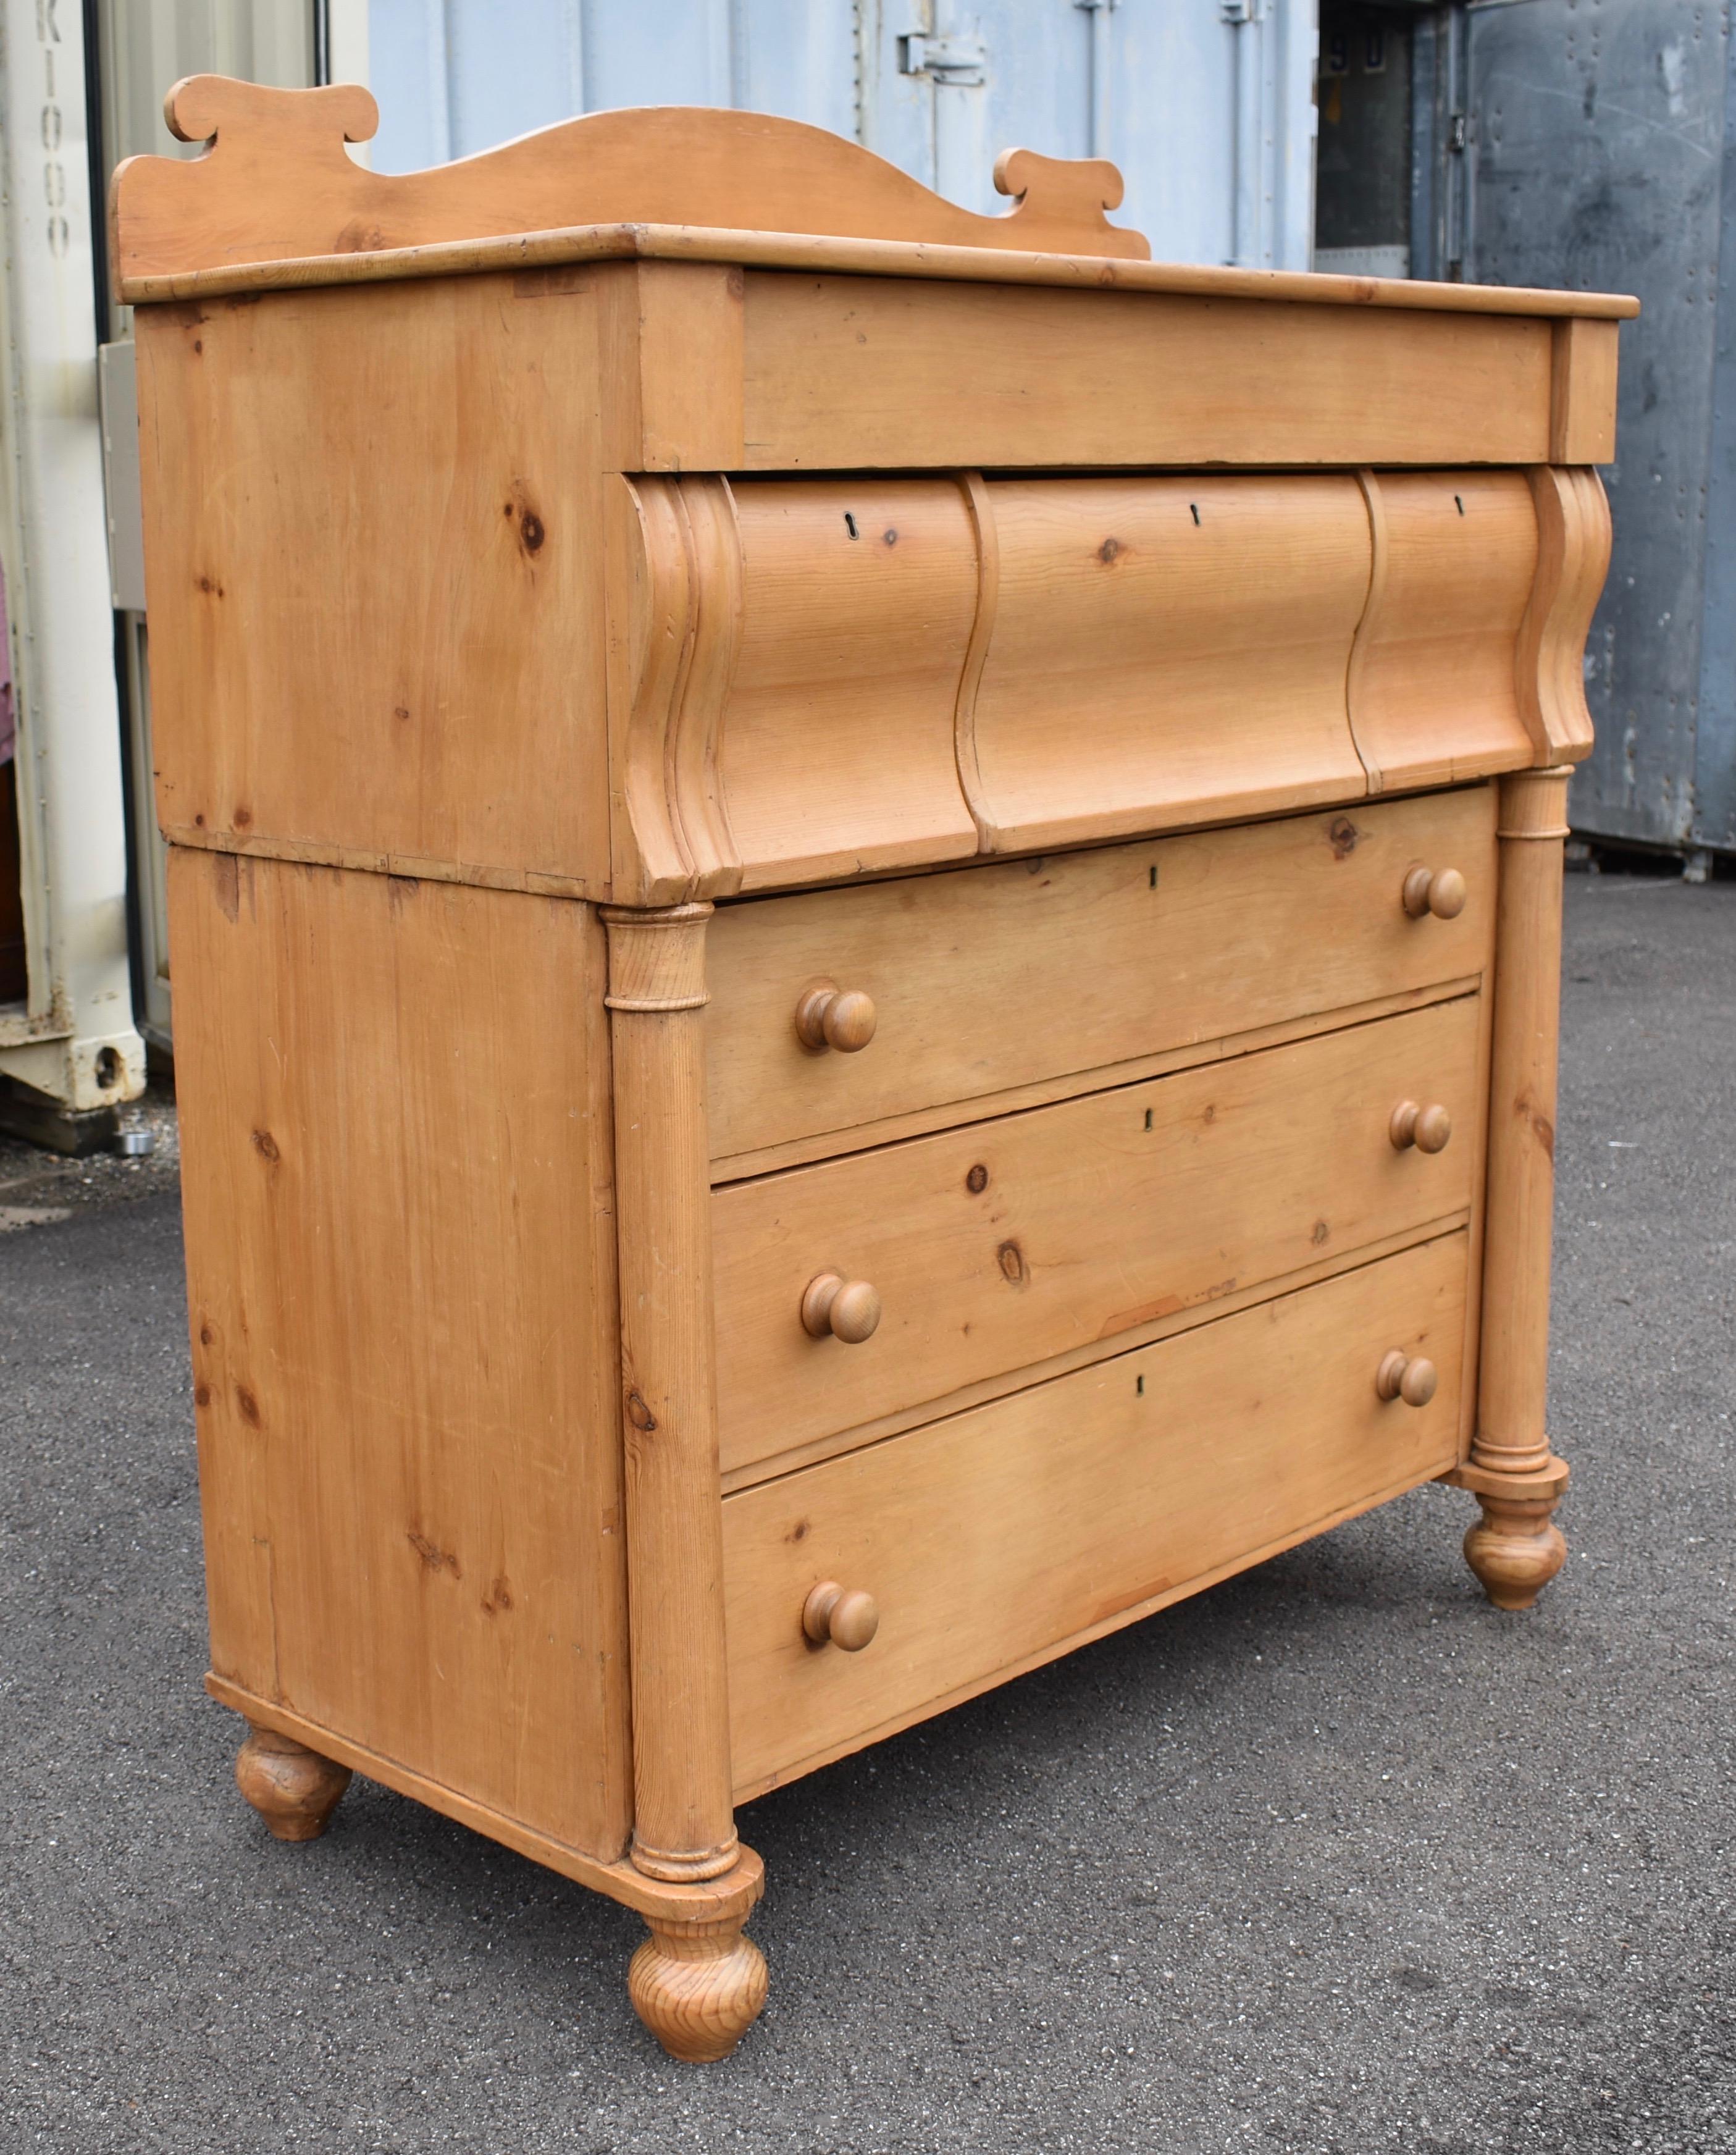 What a handsome chest of drawers!  It’s a long time since we last offered a  Scottish chest of drawers and this one is a beauty.  The piece is built in two sections, necessary for negotiating narrow passages and staircases.  The upper section has